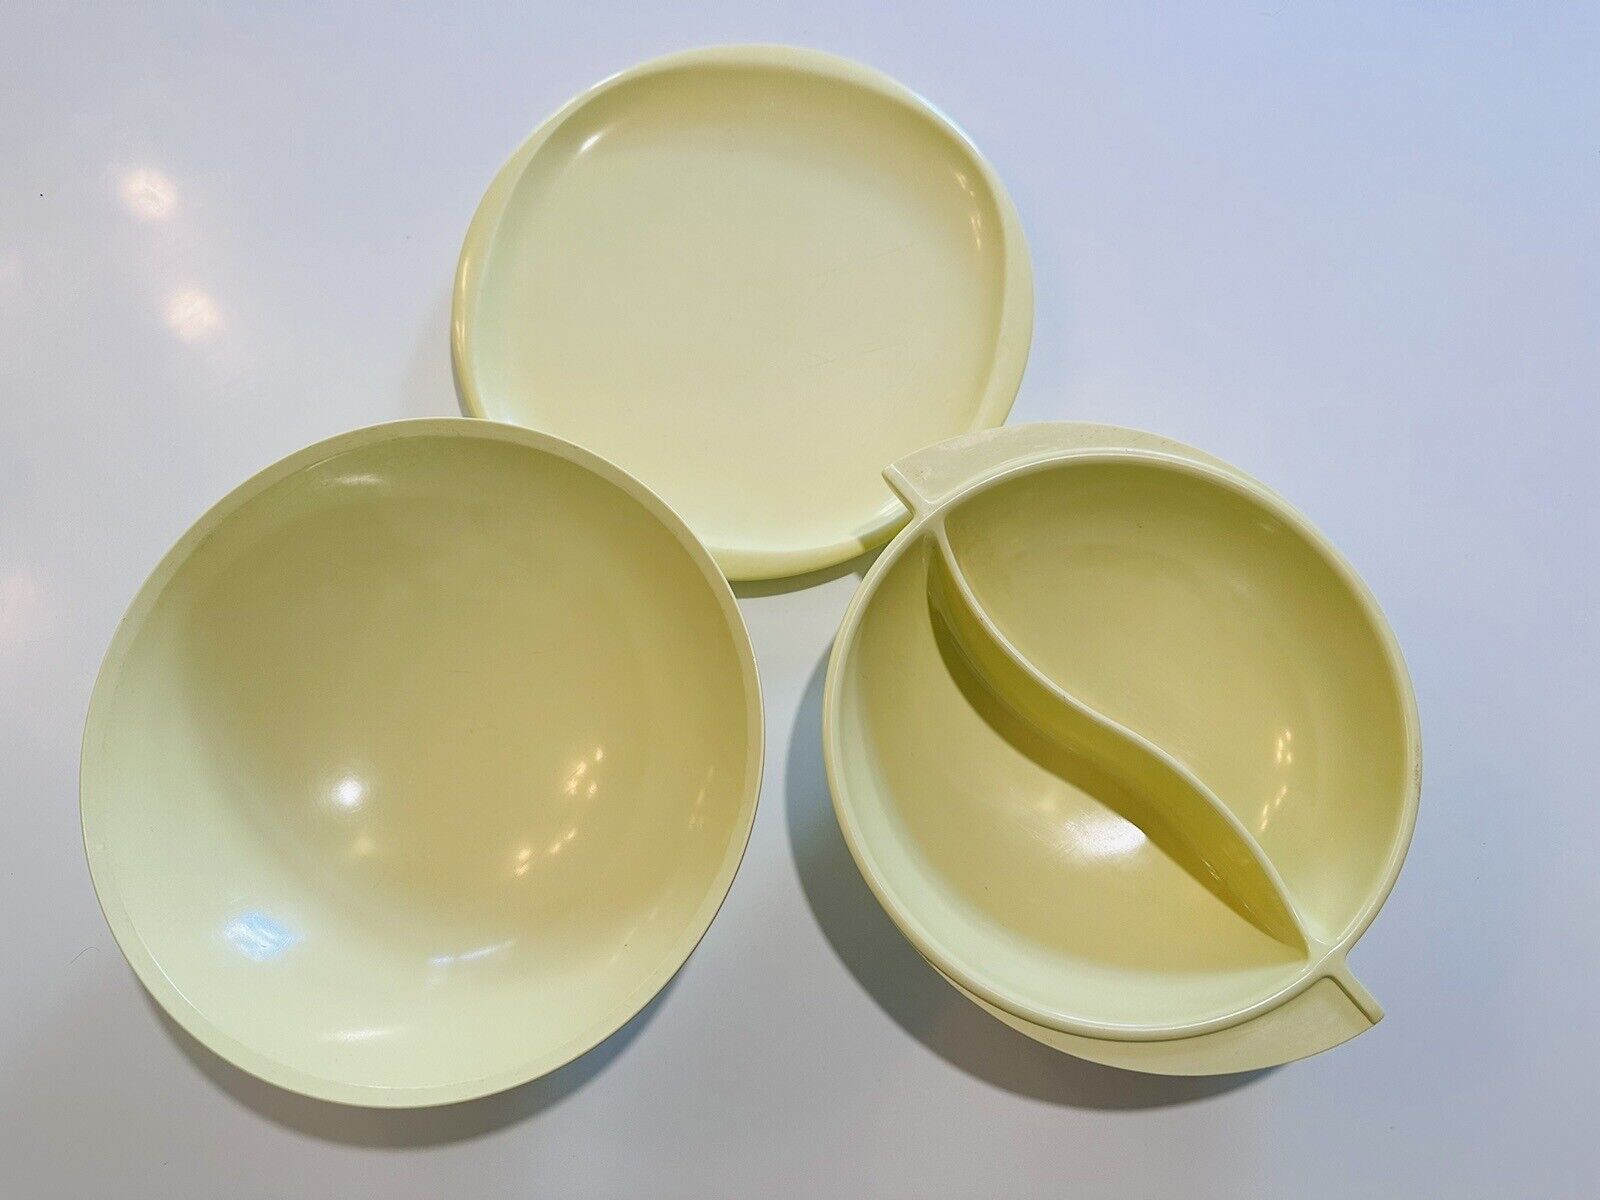 Melmac Vintage Dishes Boonton Ware Three Piece Serving Set Buttery Yellow